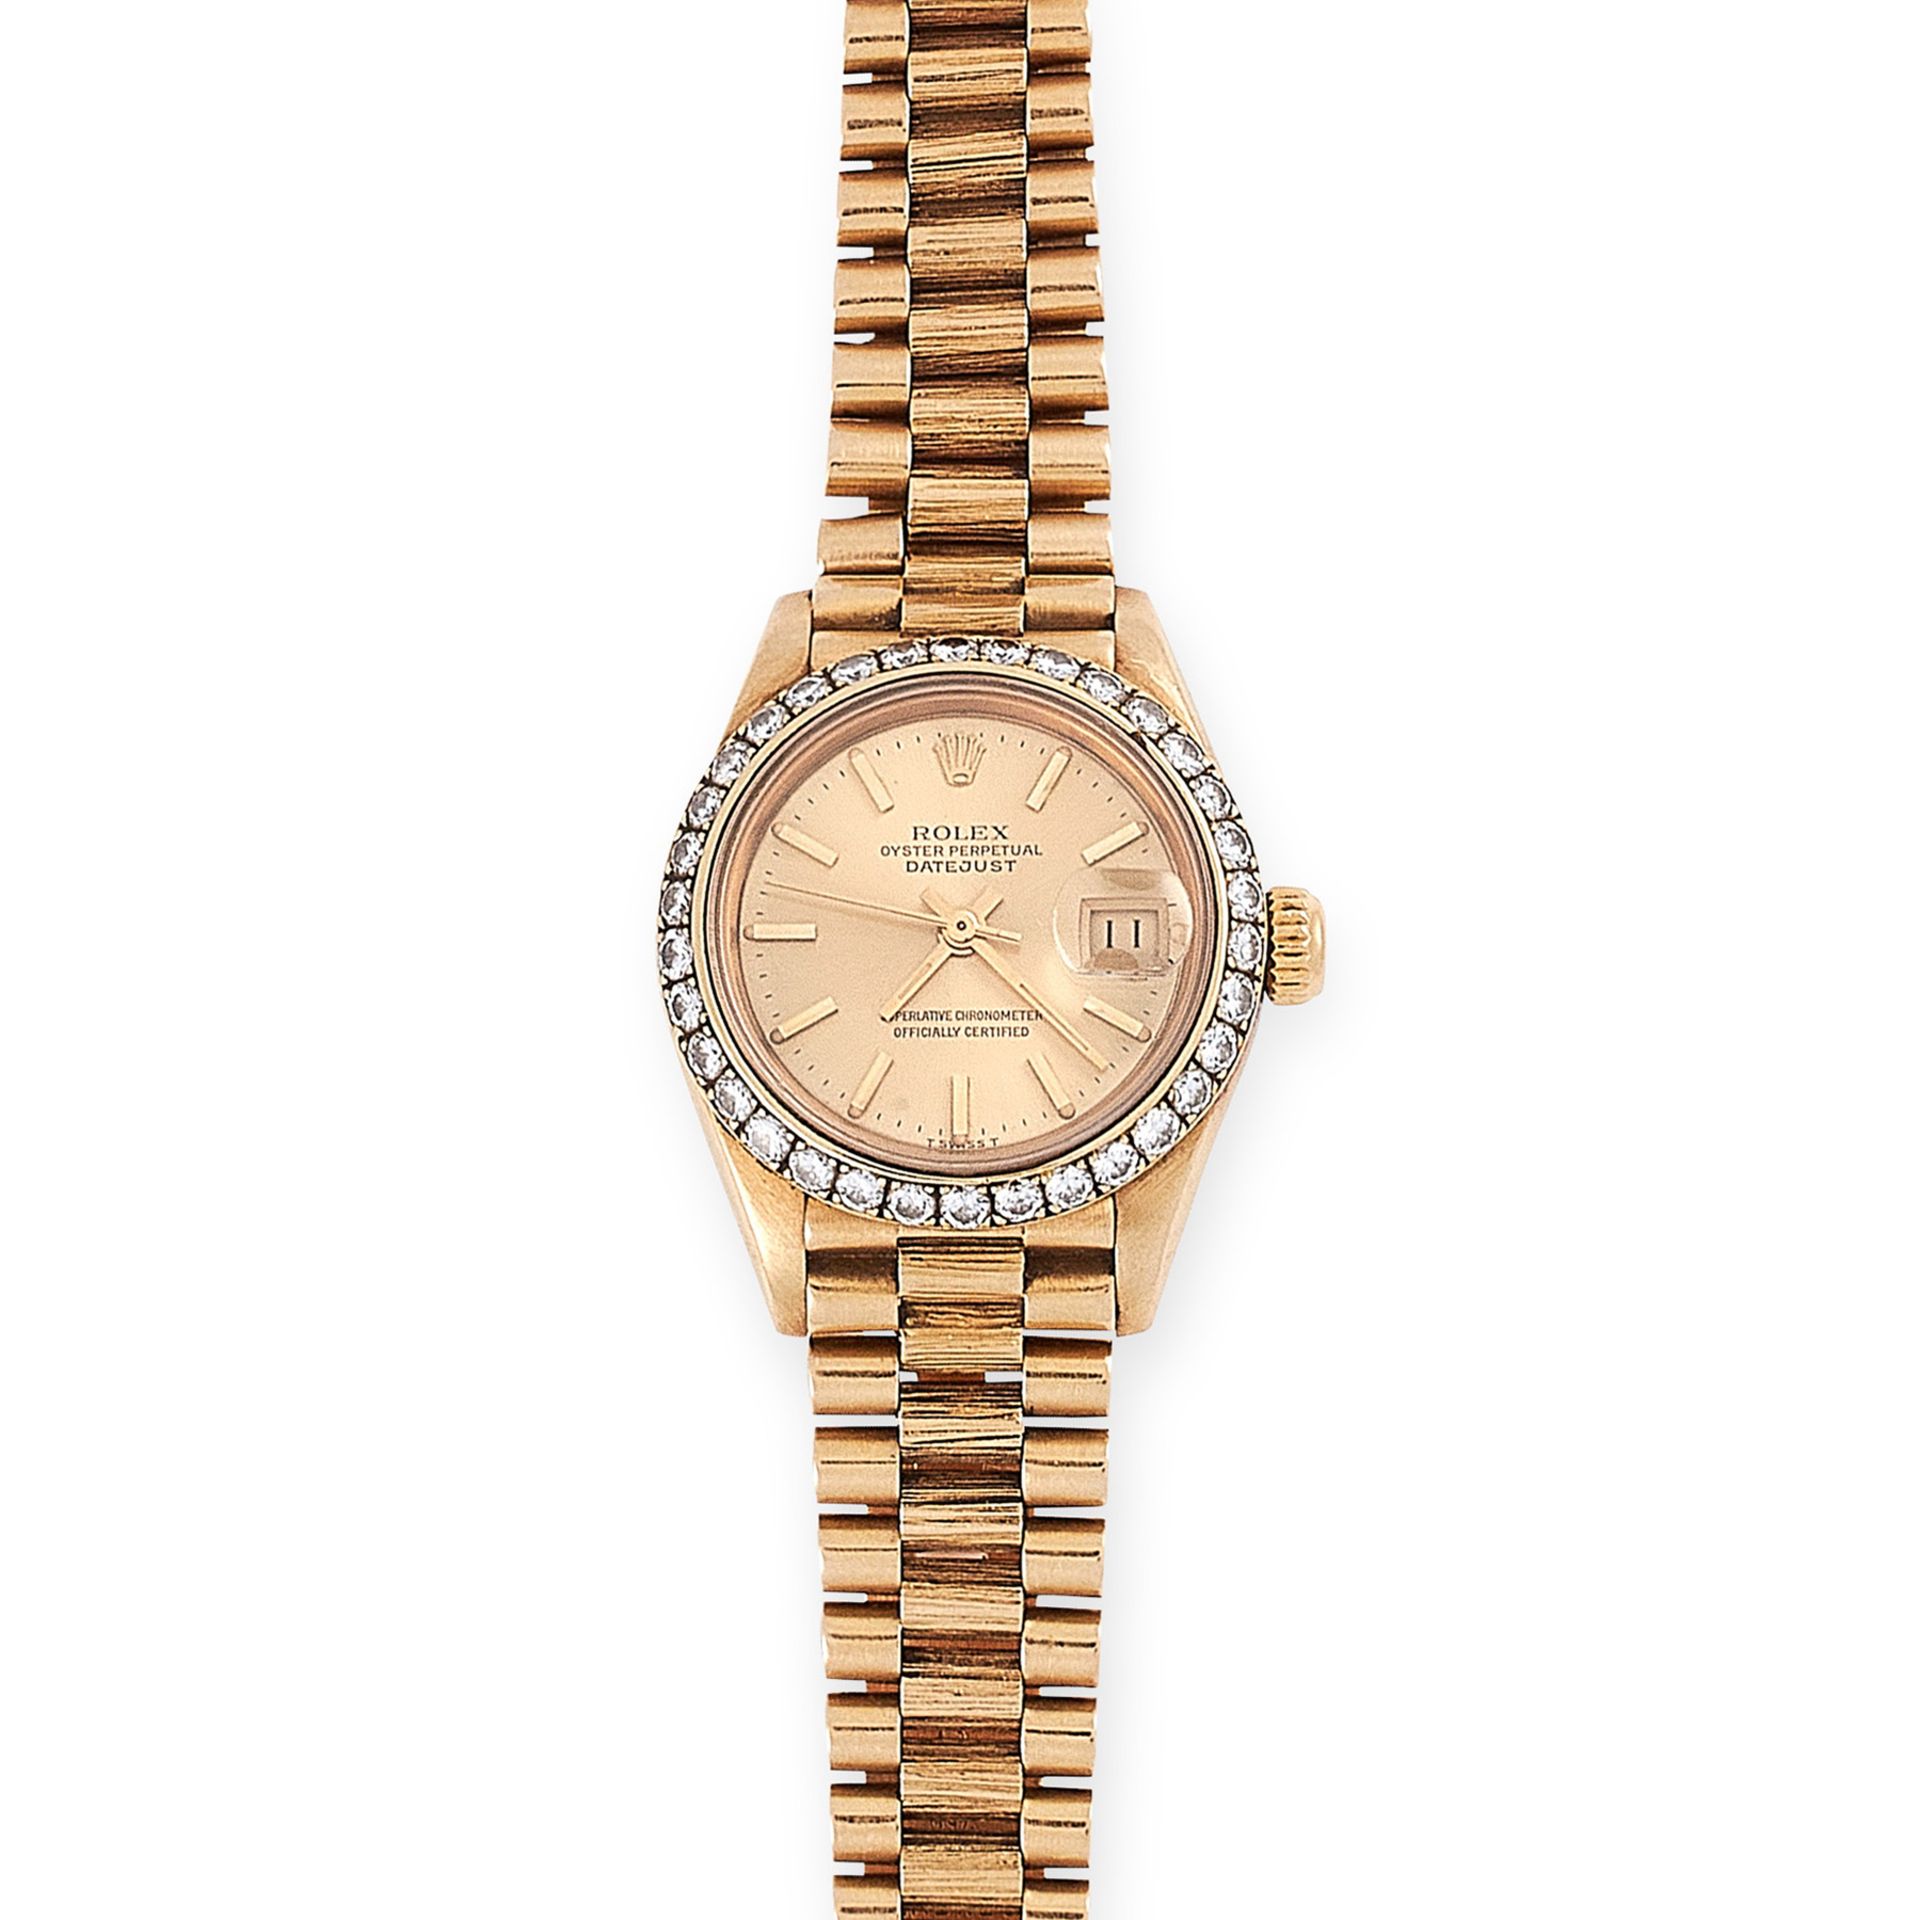 A ROLEX OYSTER PERPETUAL DATEJUST DIAMOND WRIST WATCH in 18ct yellow gold, automatic movement, - Bild 2 aus 2